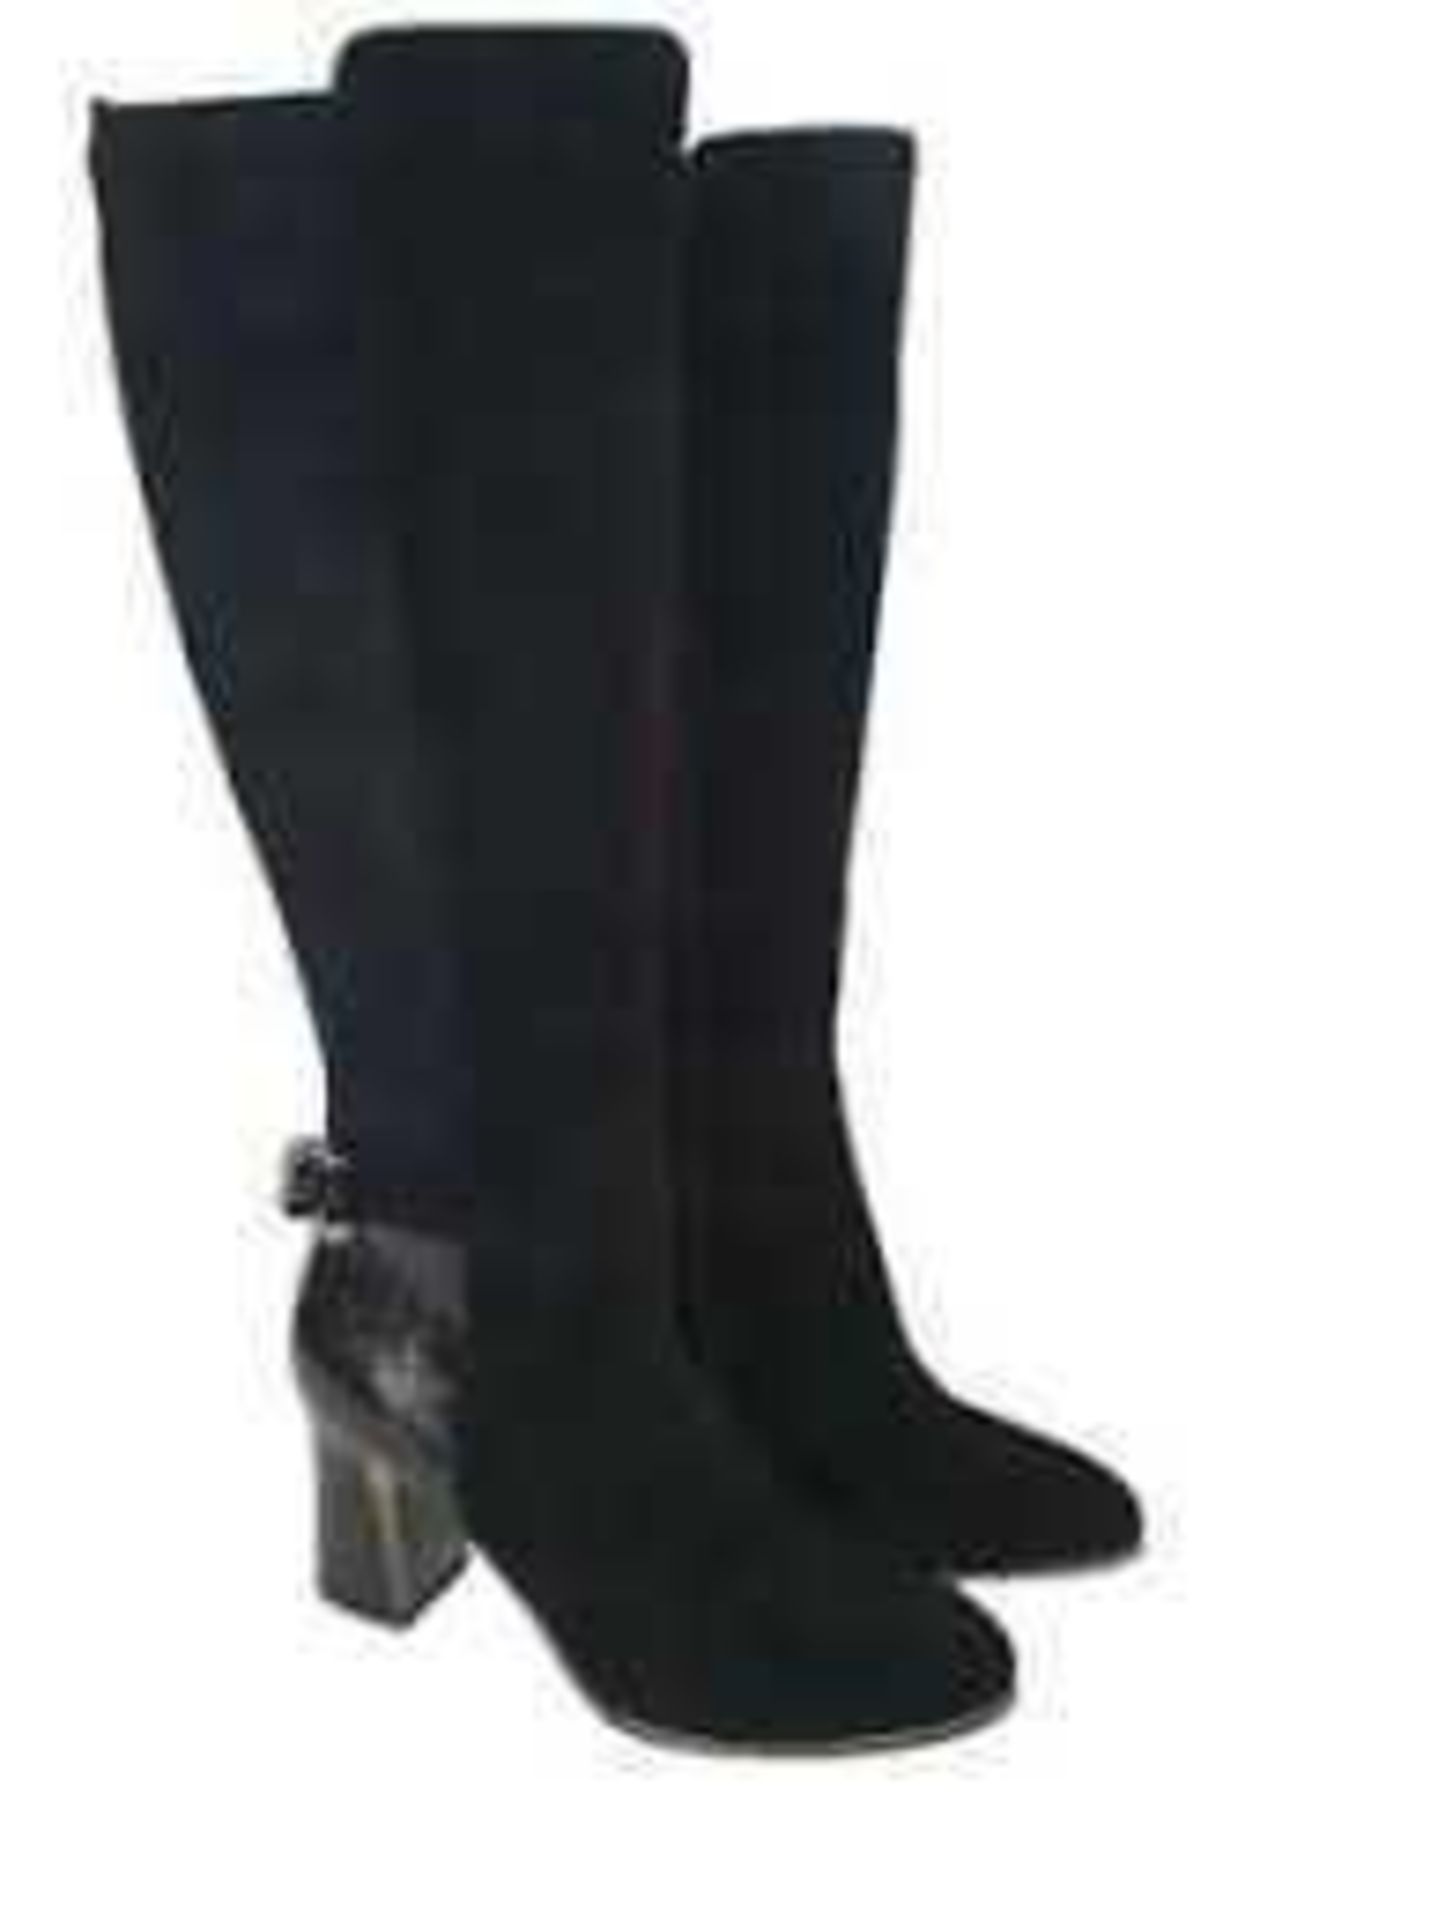 RRP £150 Boxed Moda In Pelle Tanci Knee High Boot, Navy Blue, Size 8 - Image 3 of 3